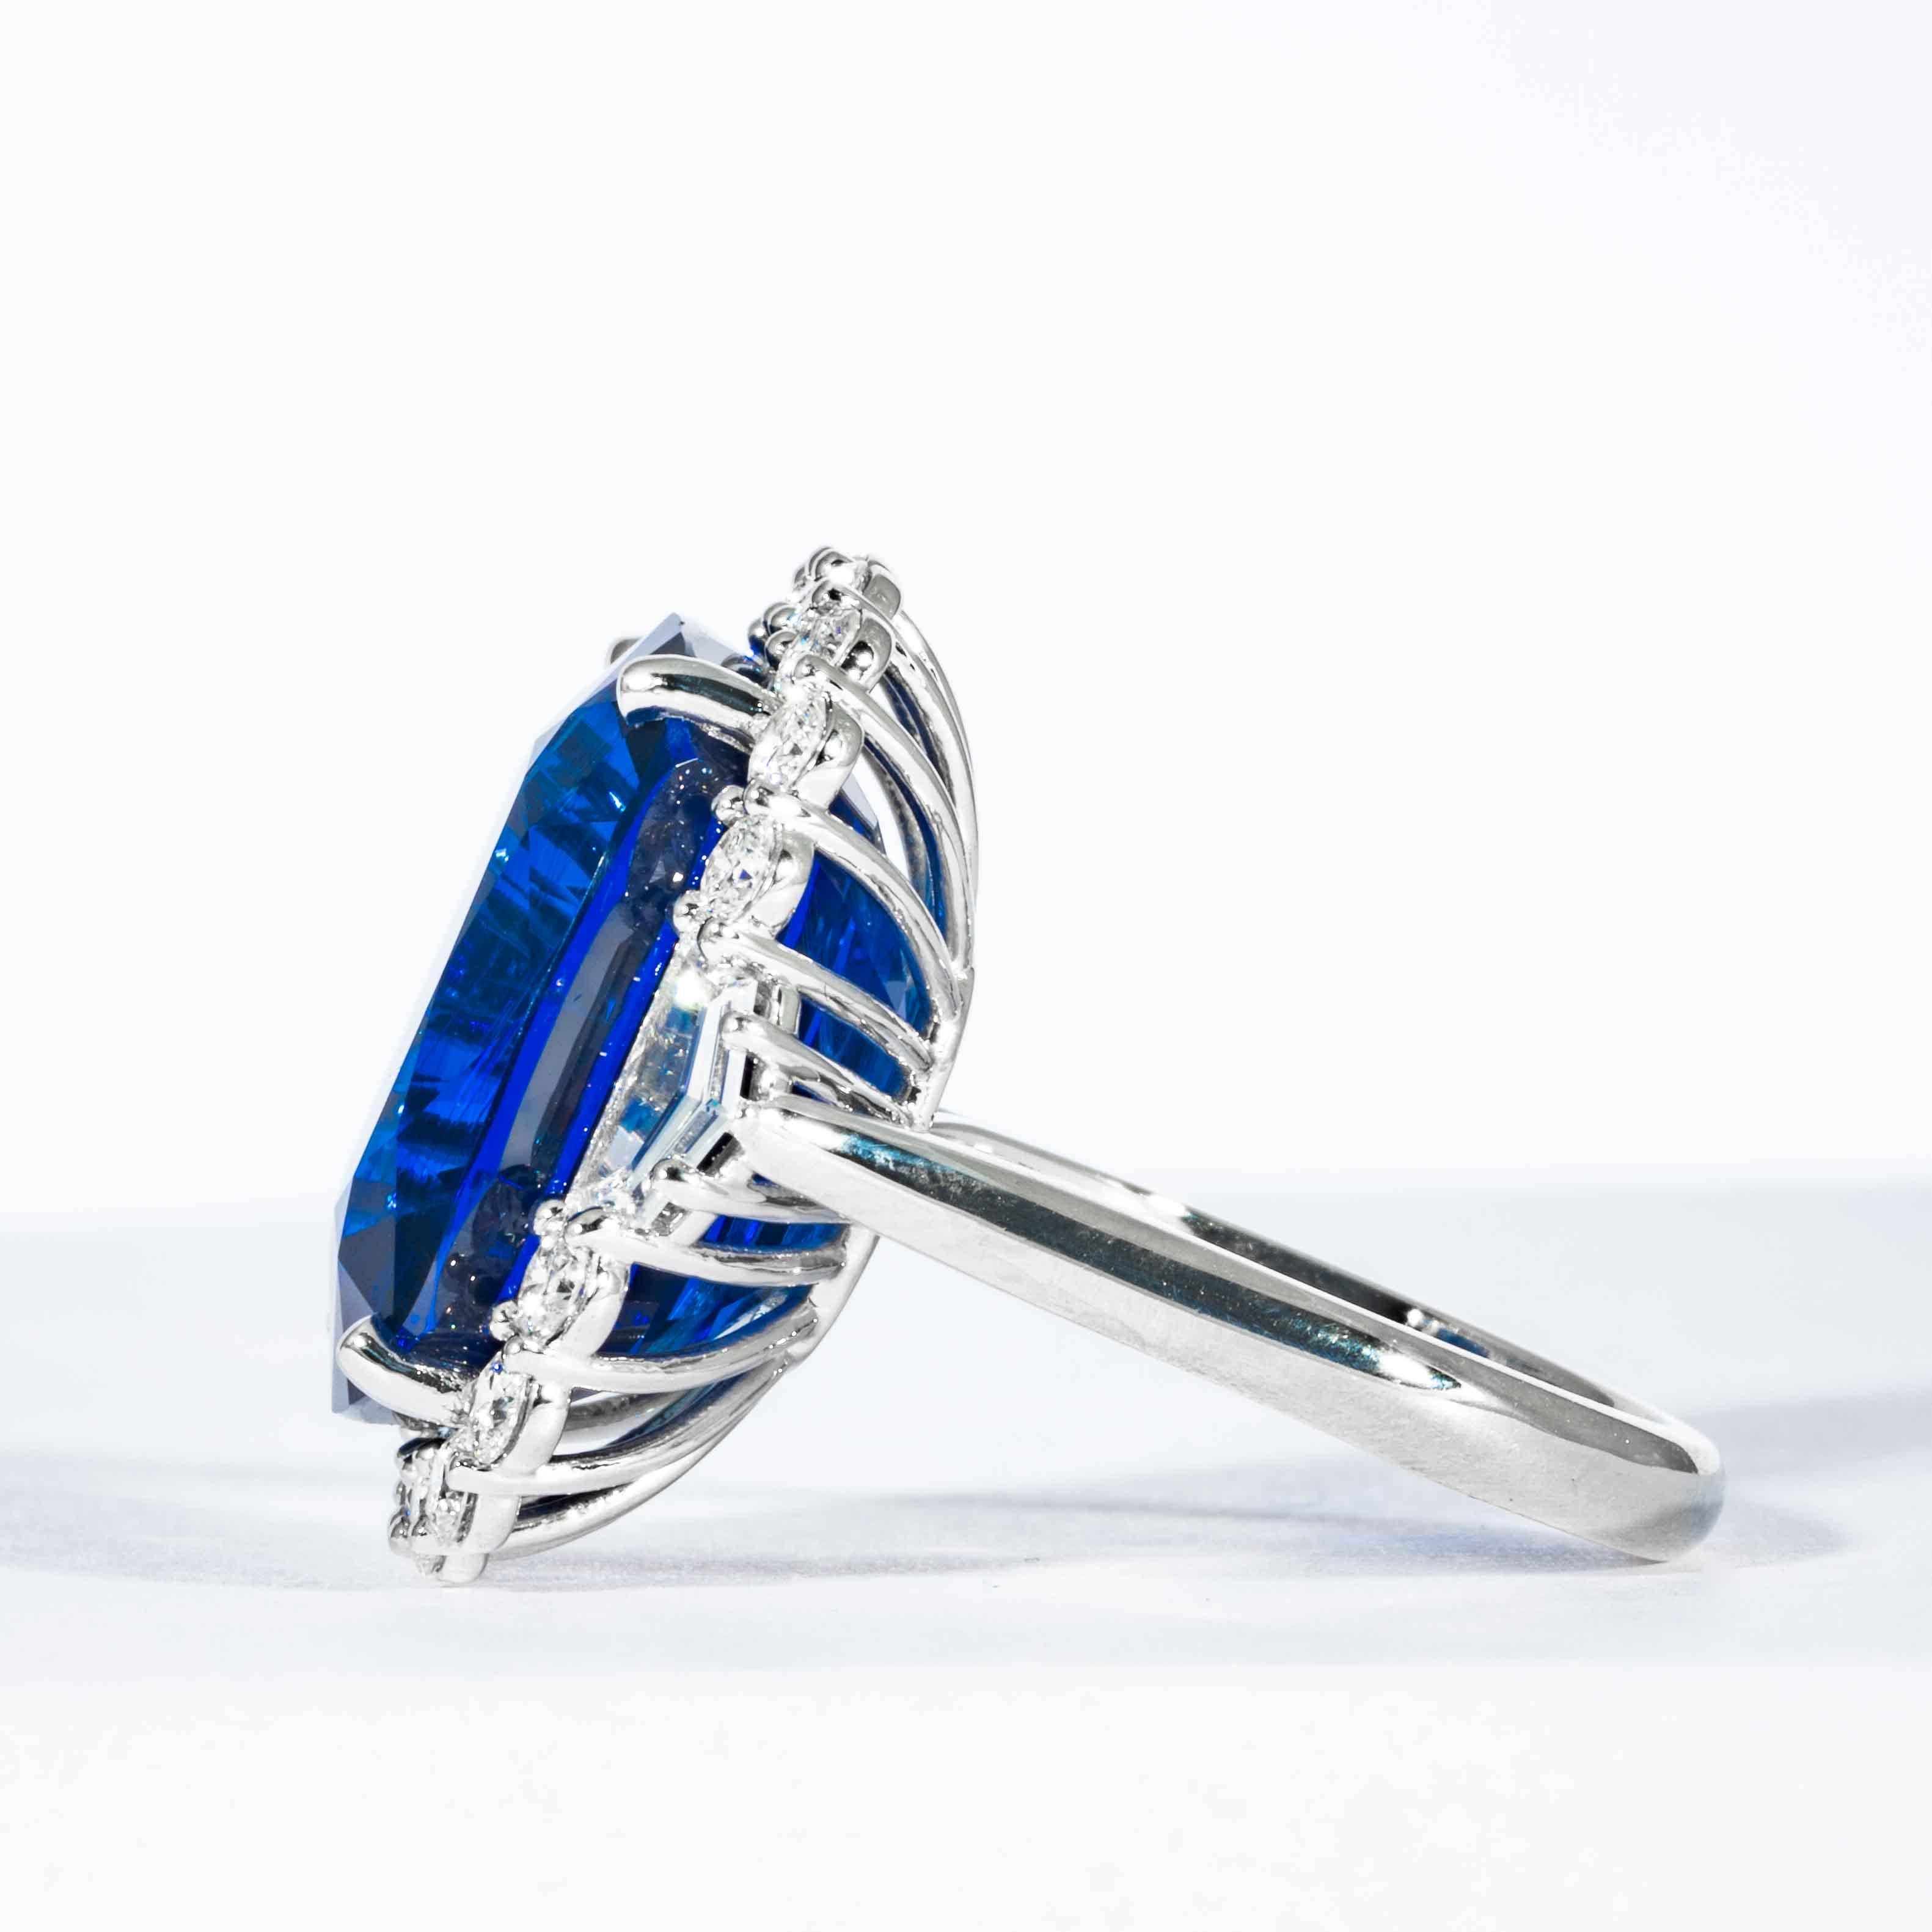 Shreve, Crump & Low 25.43 Carat Blue Sapphire Sapphire and Diamond Platinum Ring In New Condition For Sale In Boston, MA